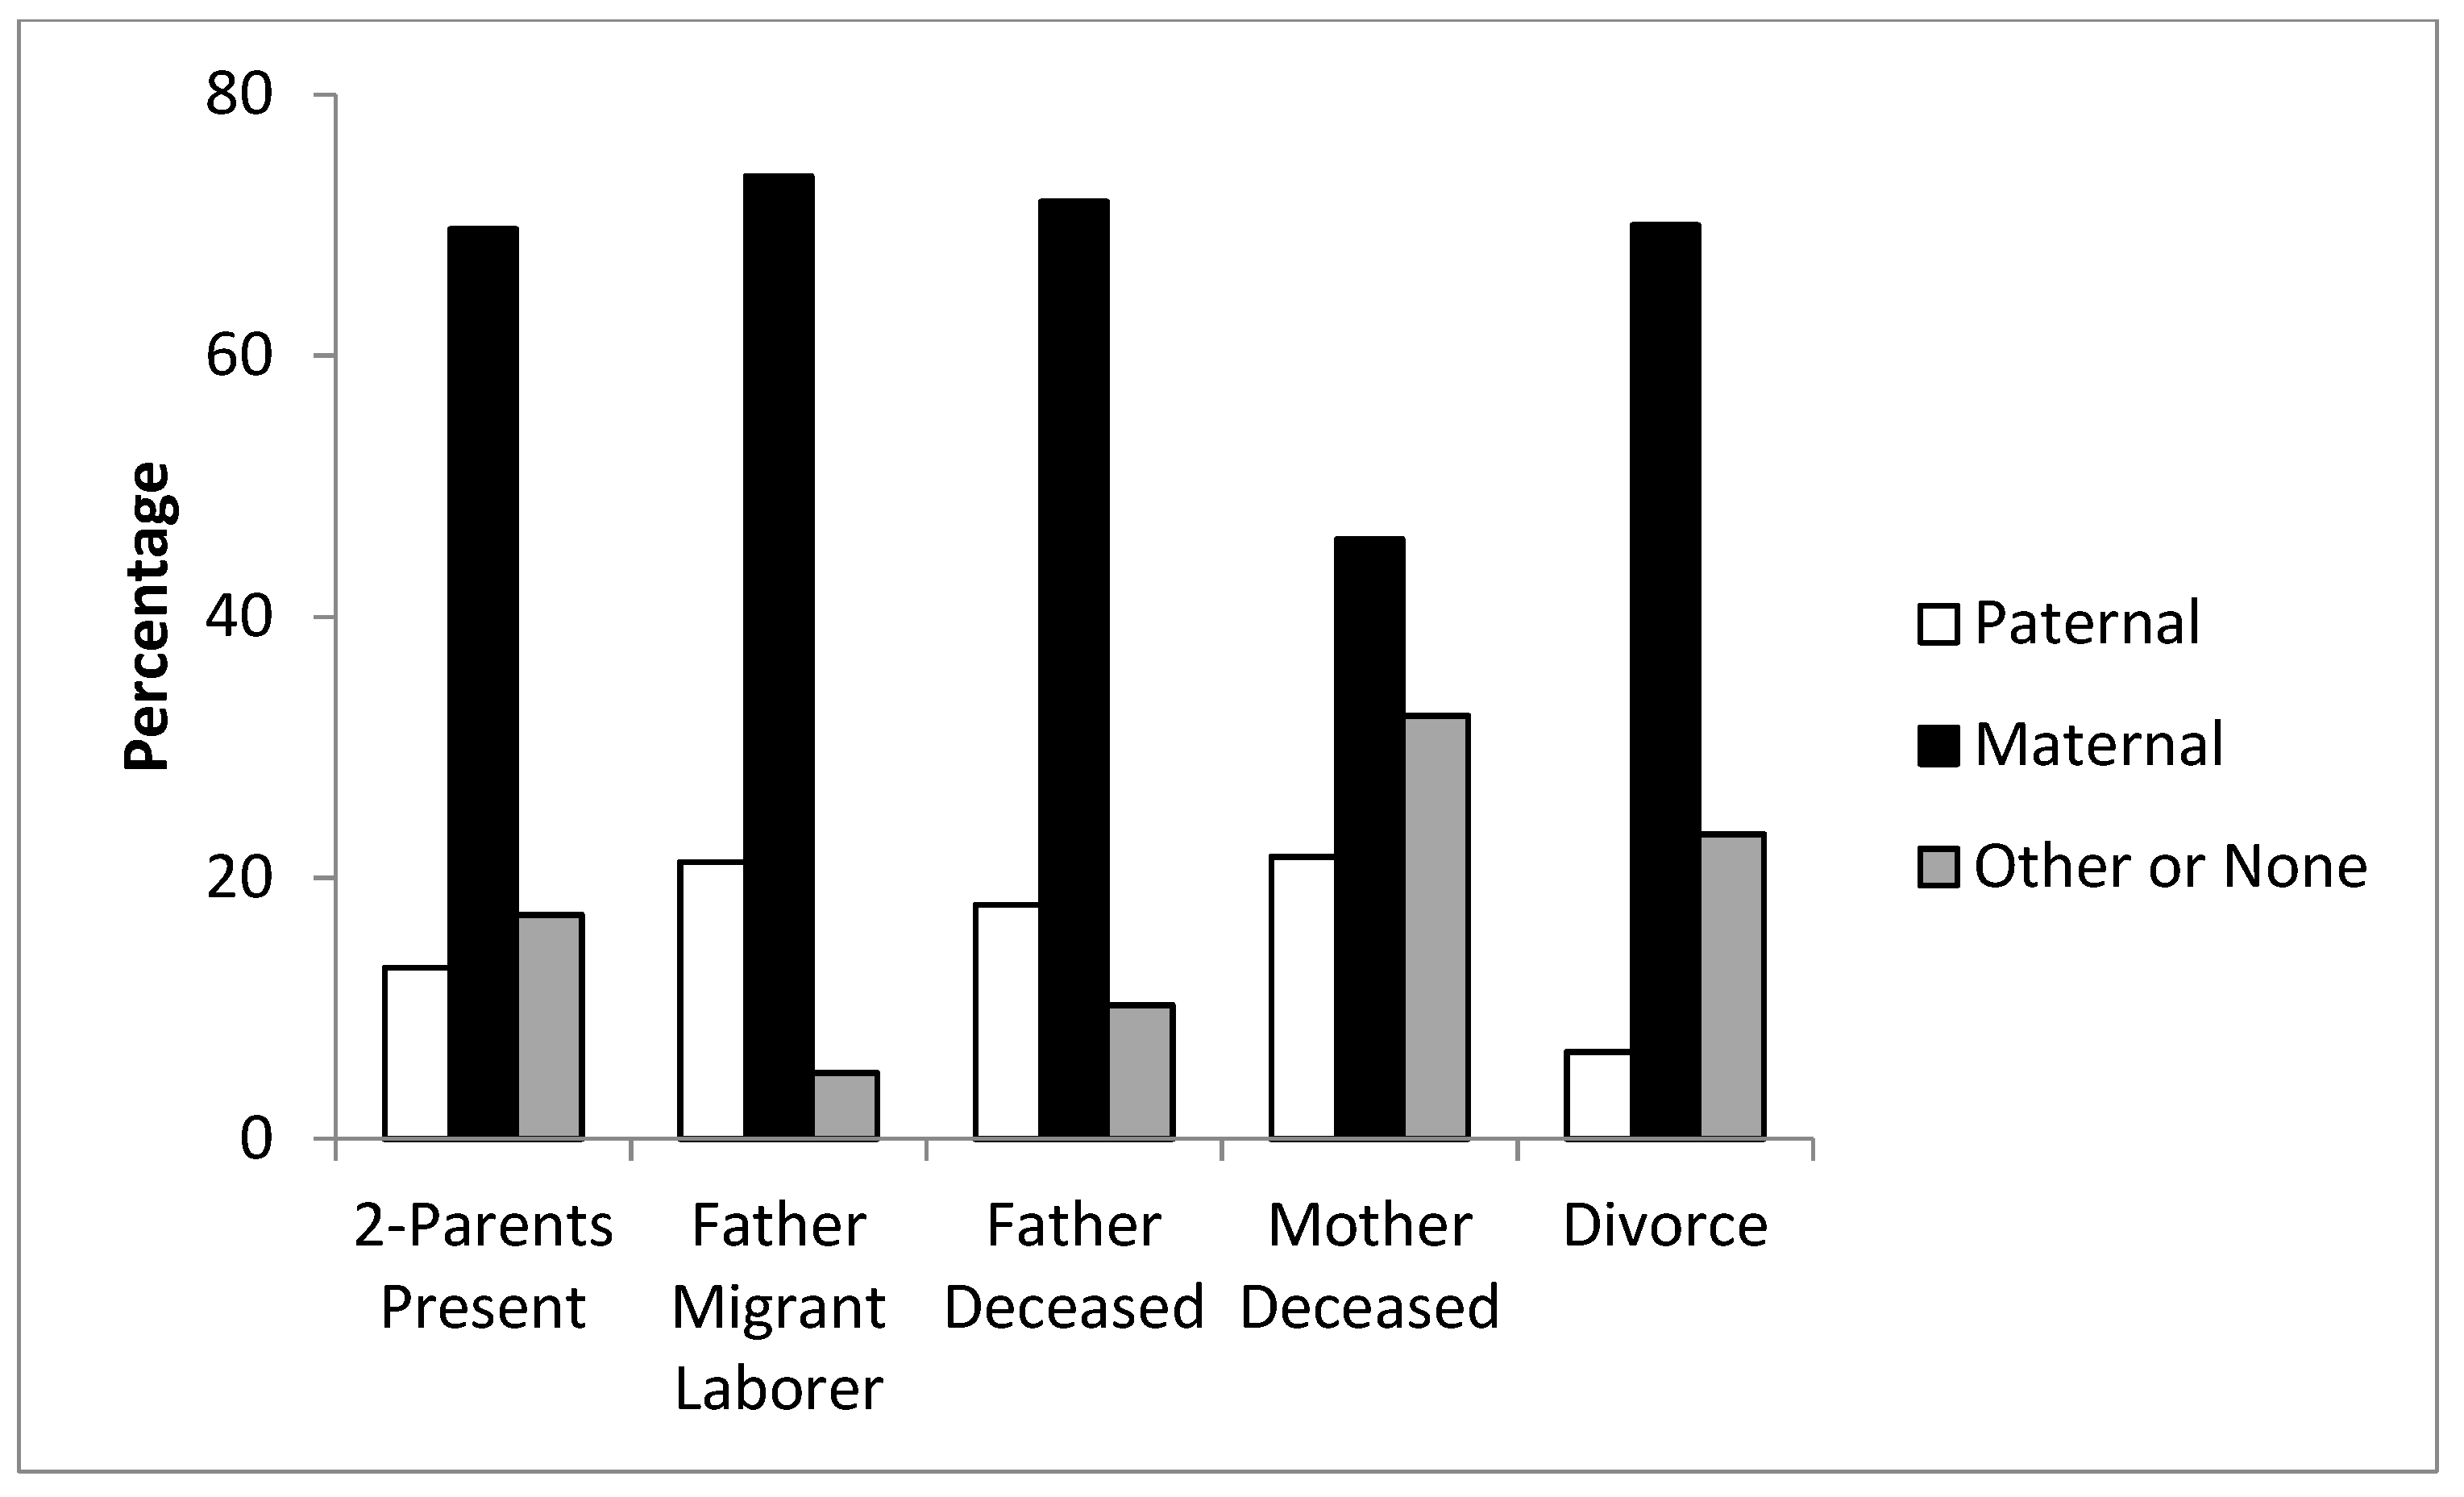 distal parenting tends to produce children who are